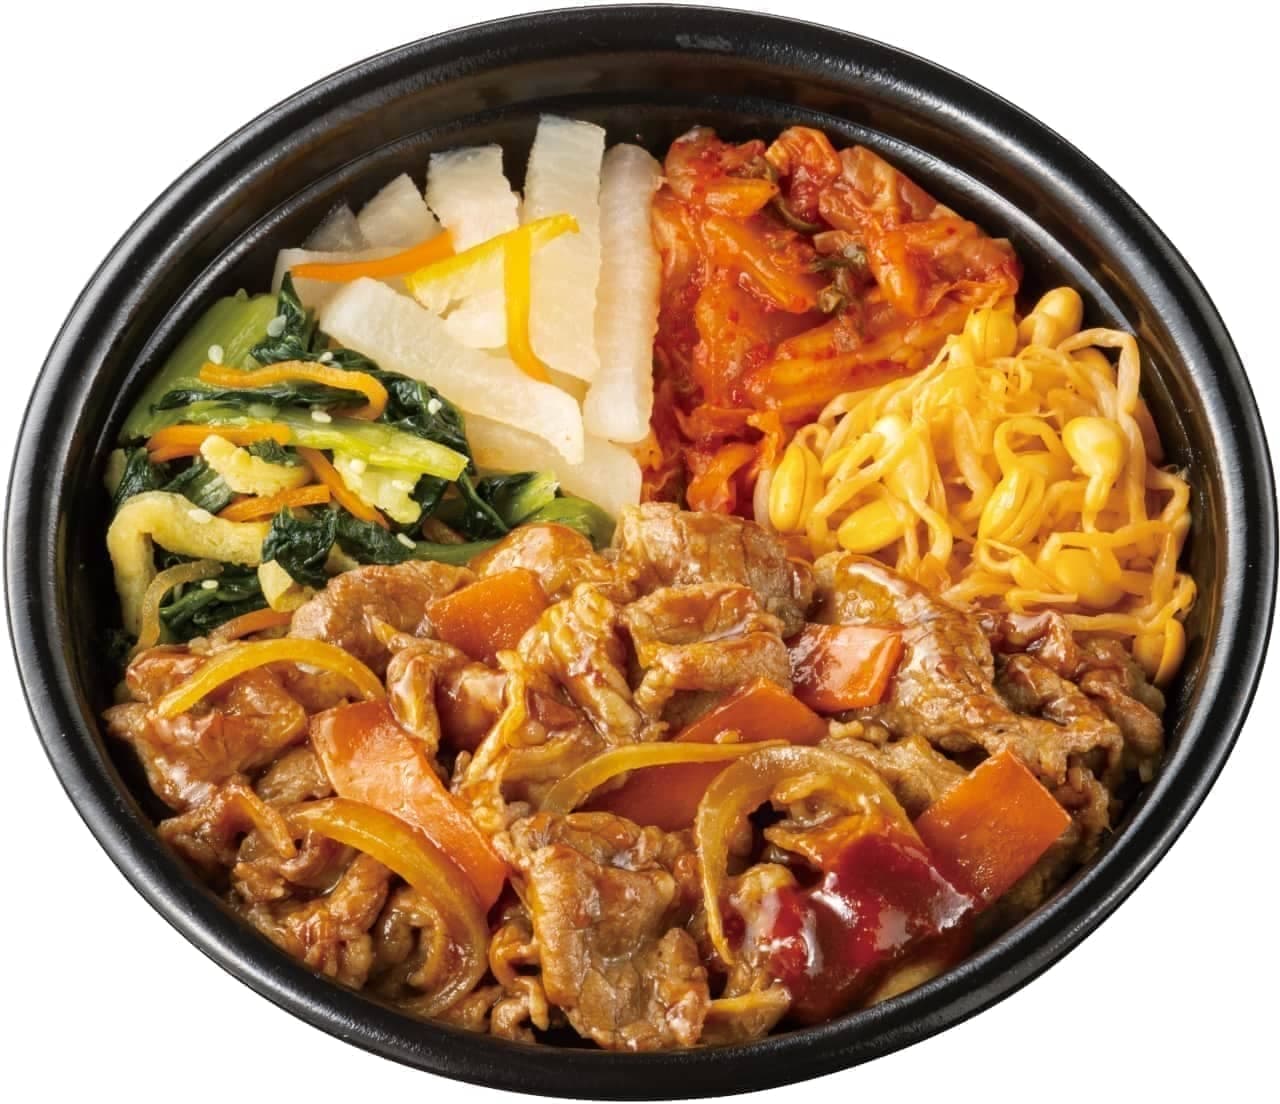 Hotto Motto "Vegetables in a Meat Extra Bibimbap (without hot egg)".